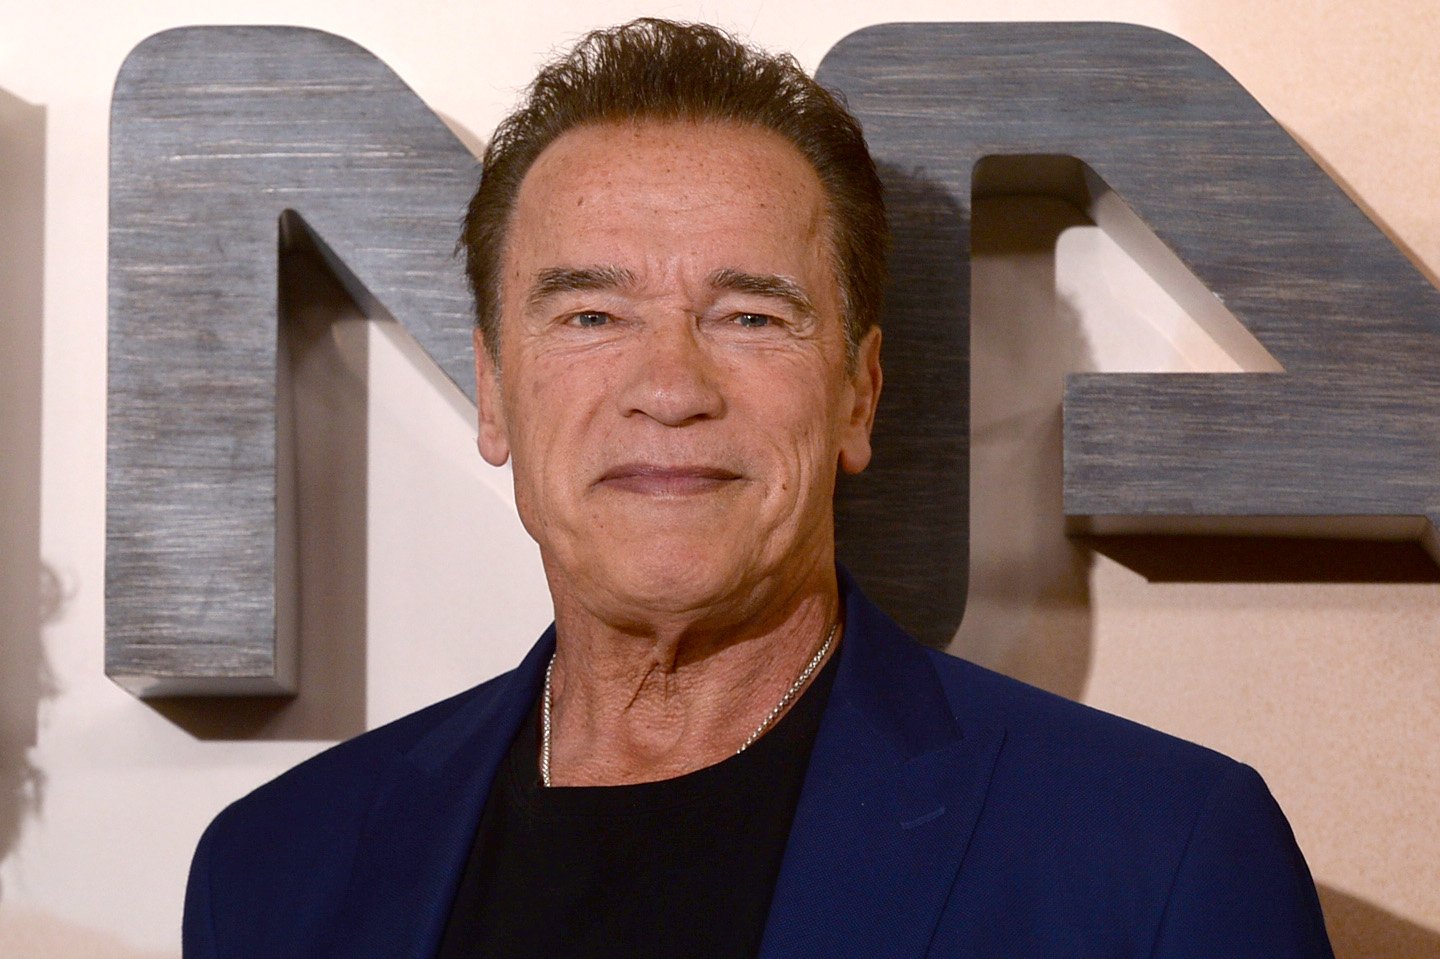 Arnold Schwarzenegger pictured at the "Terminator: Dark Fate" photocall in 2019. | Photo: Getty Images